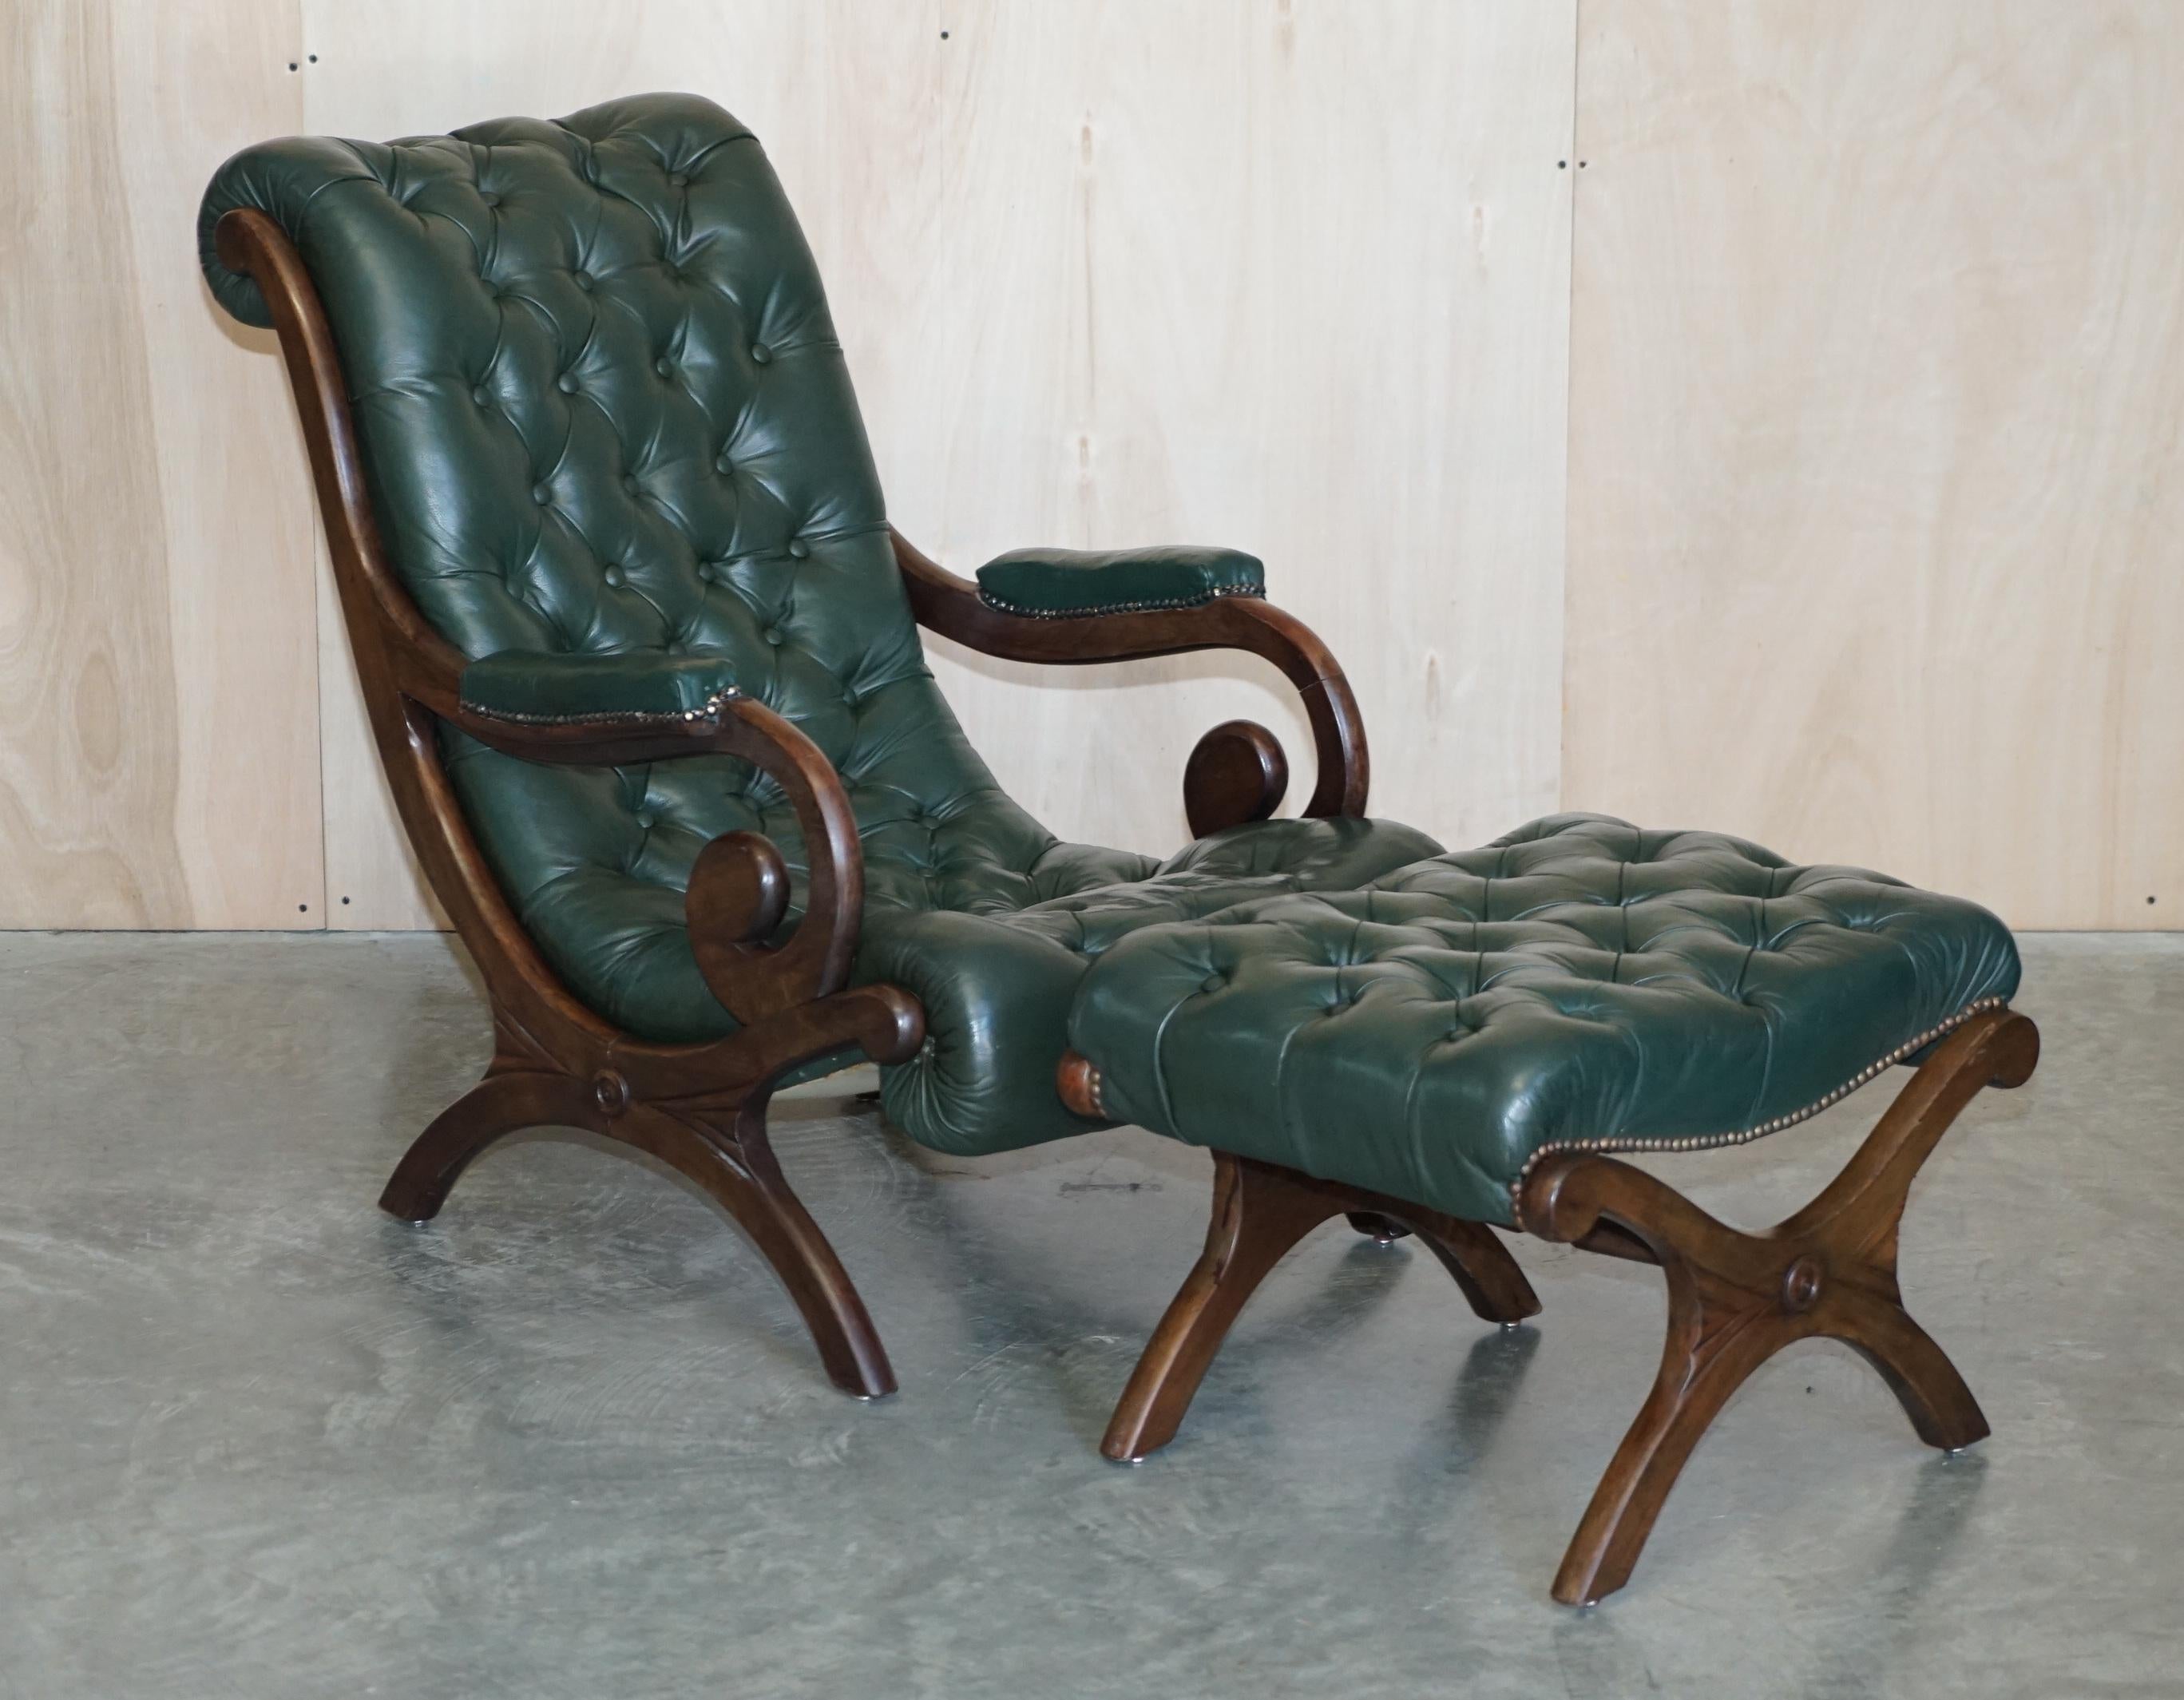 We are delighted to offer for sale this pair of original late Victorian, green leather tufted Chesterfield library slipper reading armchairs with matching footstool

A very good looking and well made pair, they are late Victorian examples as